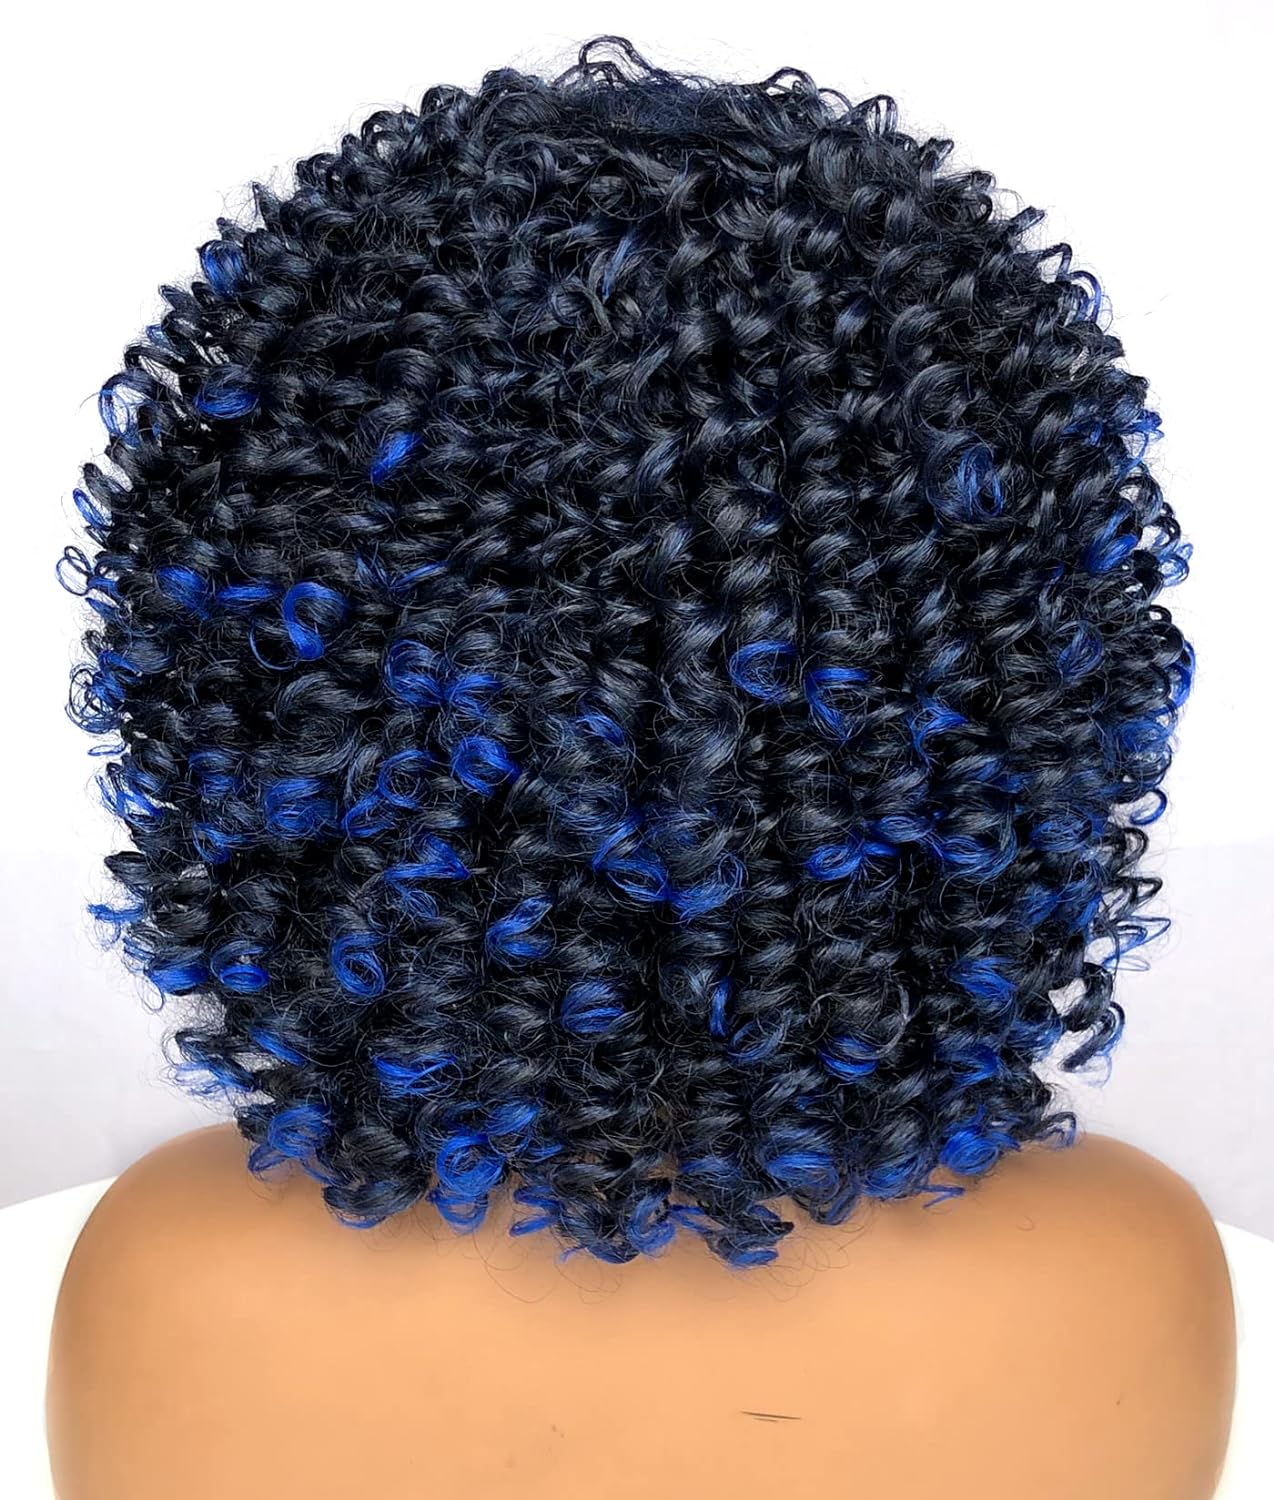 Short Curly Wig for Black Women with Bangs Big Bouncy Fluffy Kinky Curly Wig Heat Resist Soft Synthetic 2Tone Ombre Darkest Brown Short Curly Afro Wig